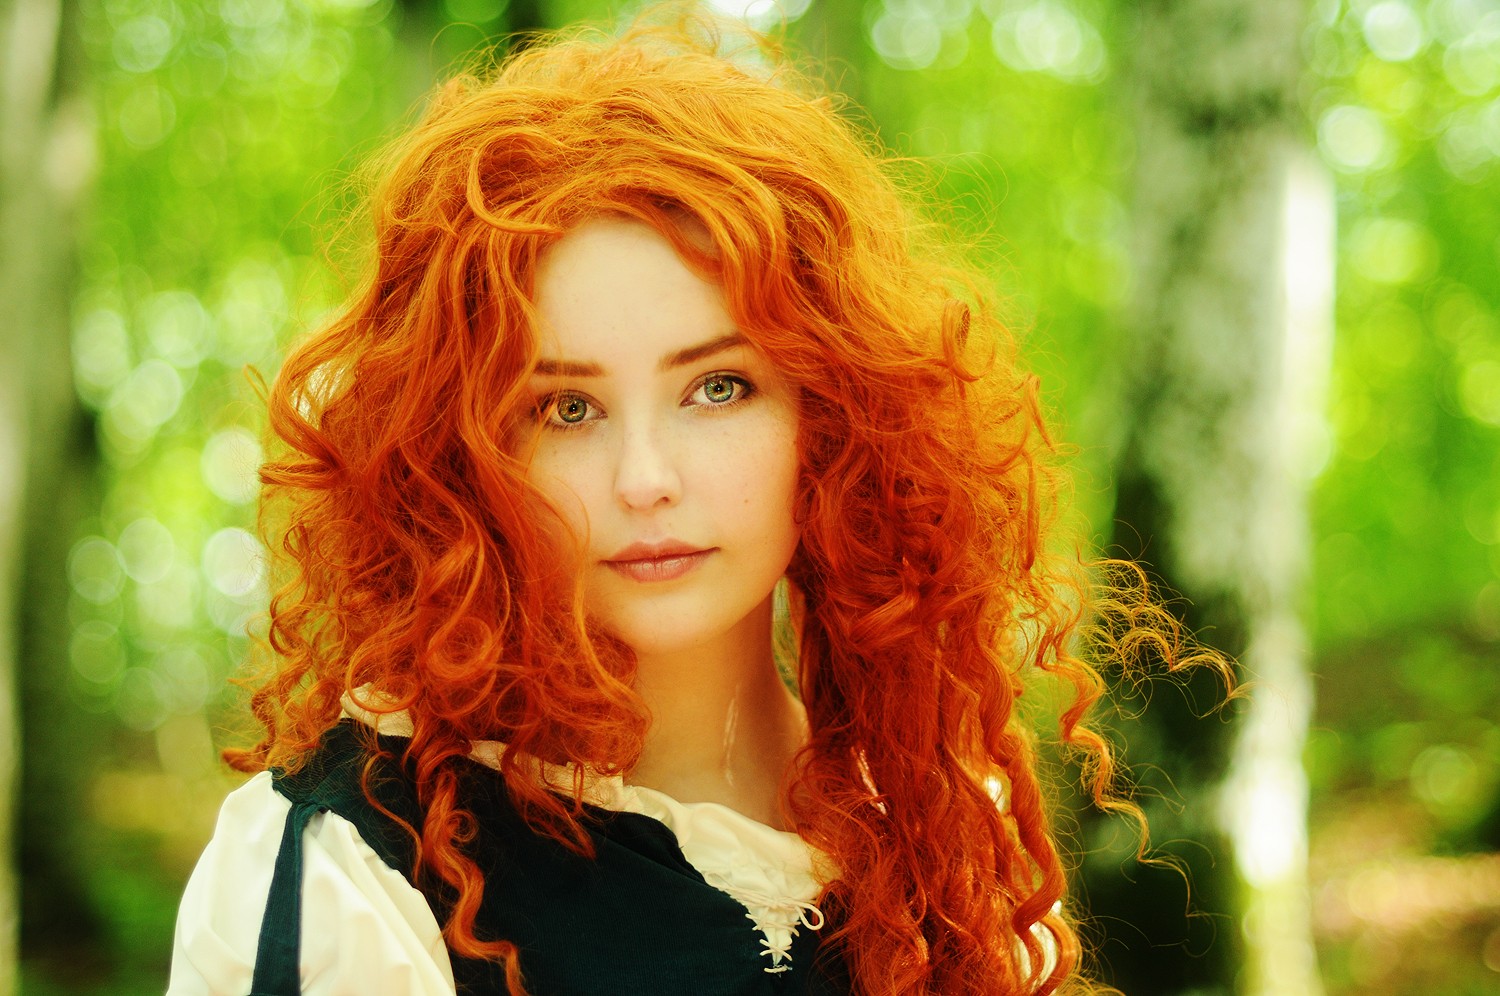 People 1500x996 women redhead blue eyes face curly hair blurred Brave cosplay freckles Princess Merida looking at viewer model